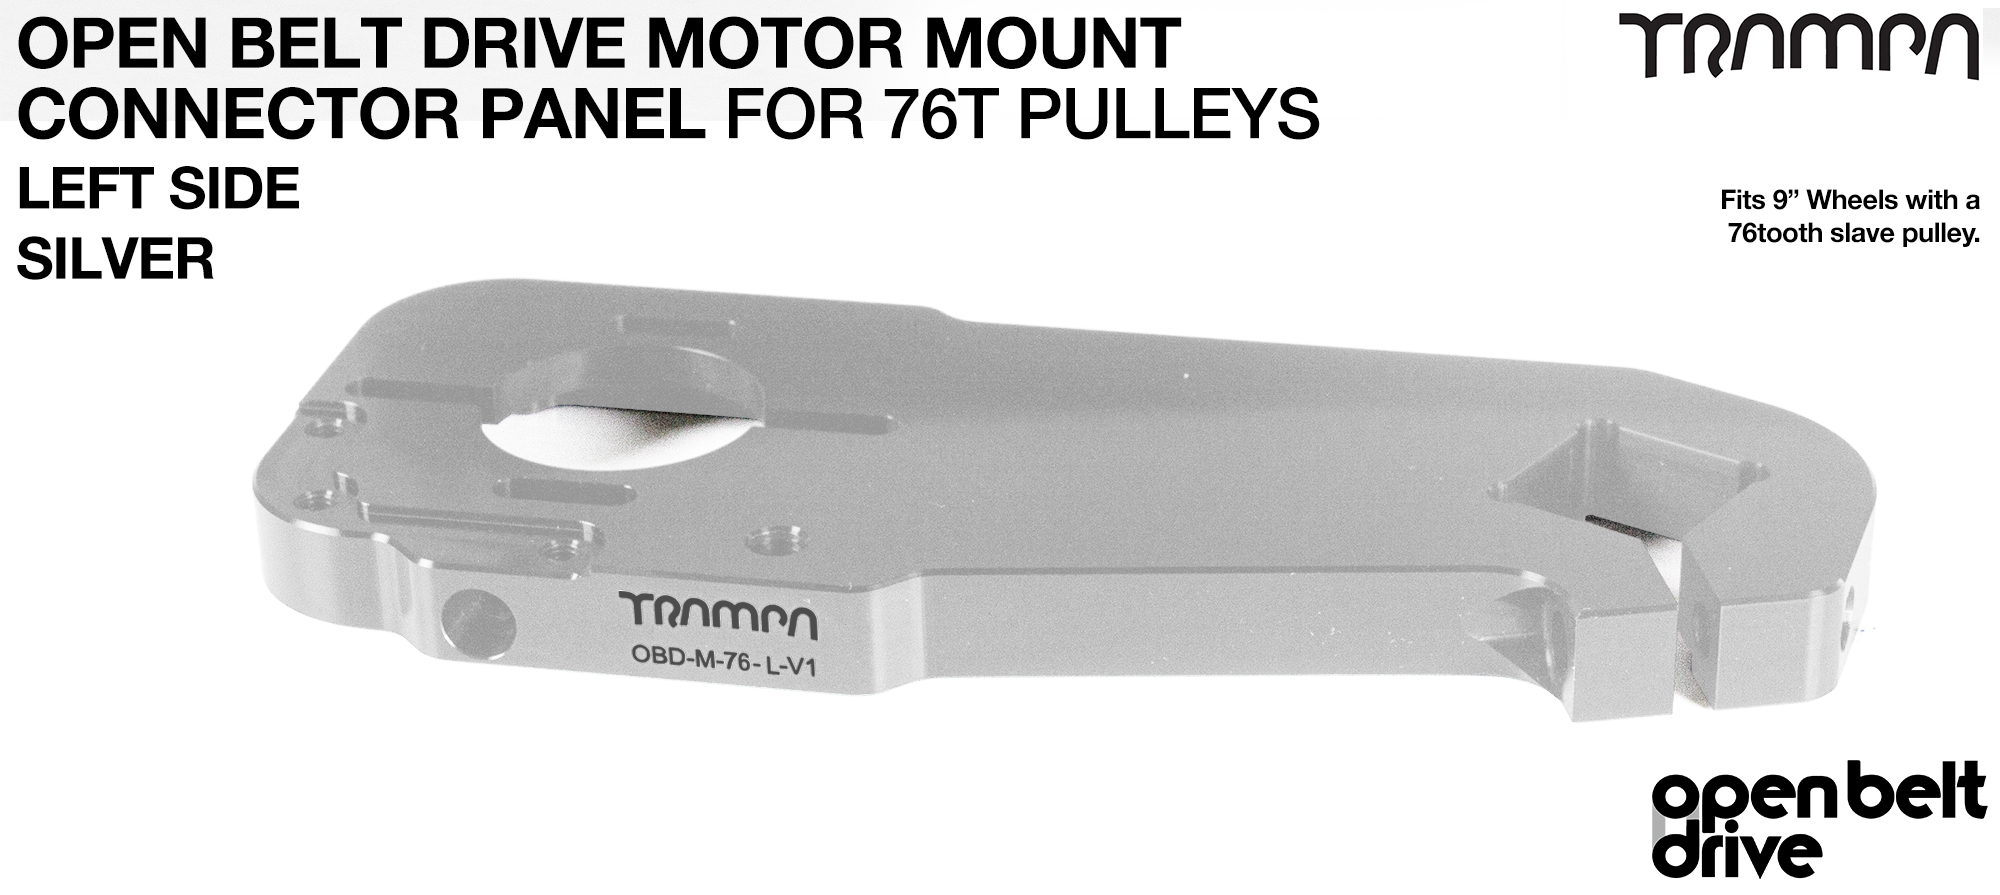 OBD Motor Mount Connector Panel for 76 tooth pulleys - REGULAR - SILVER